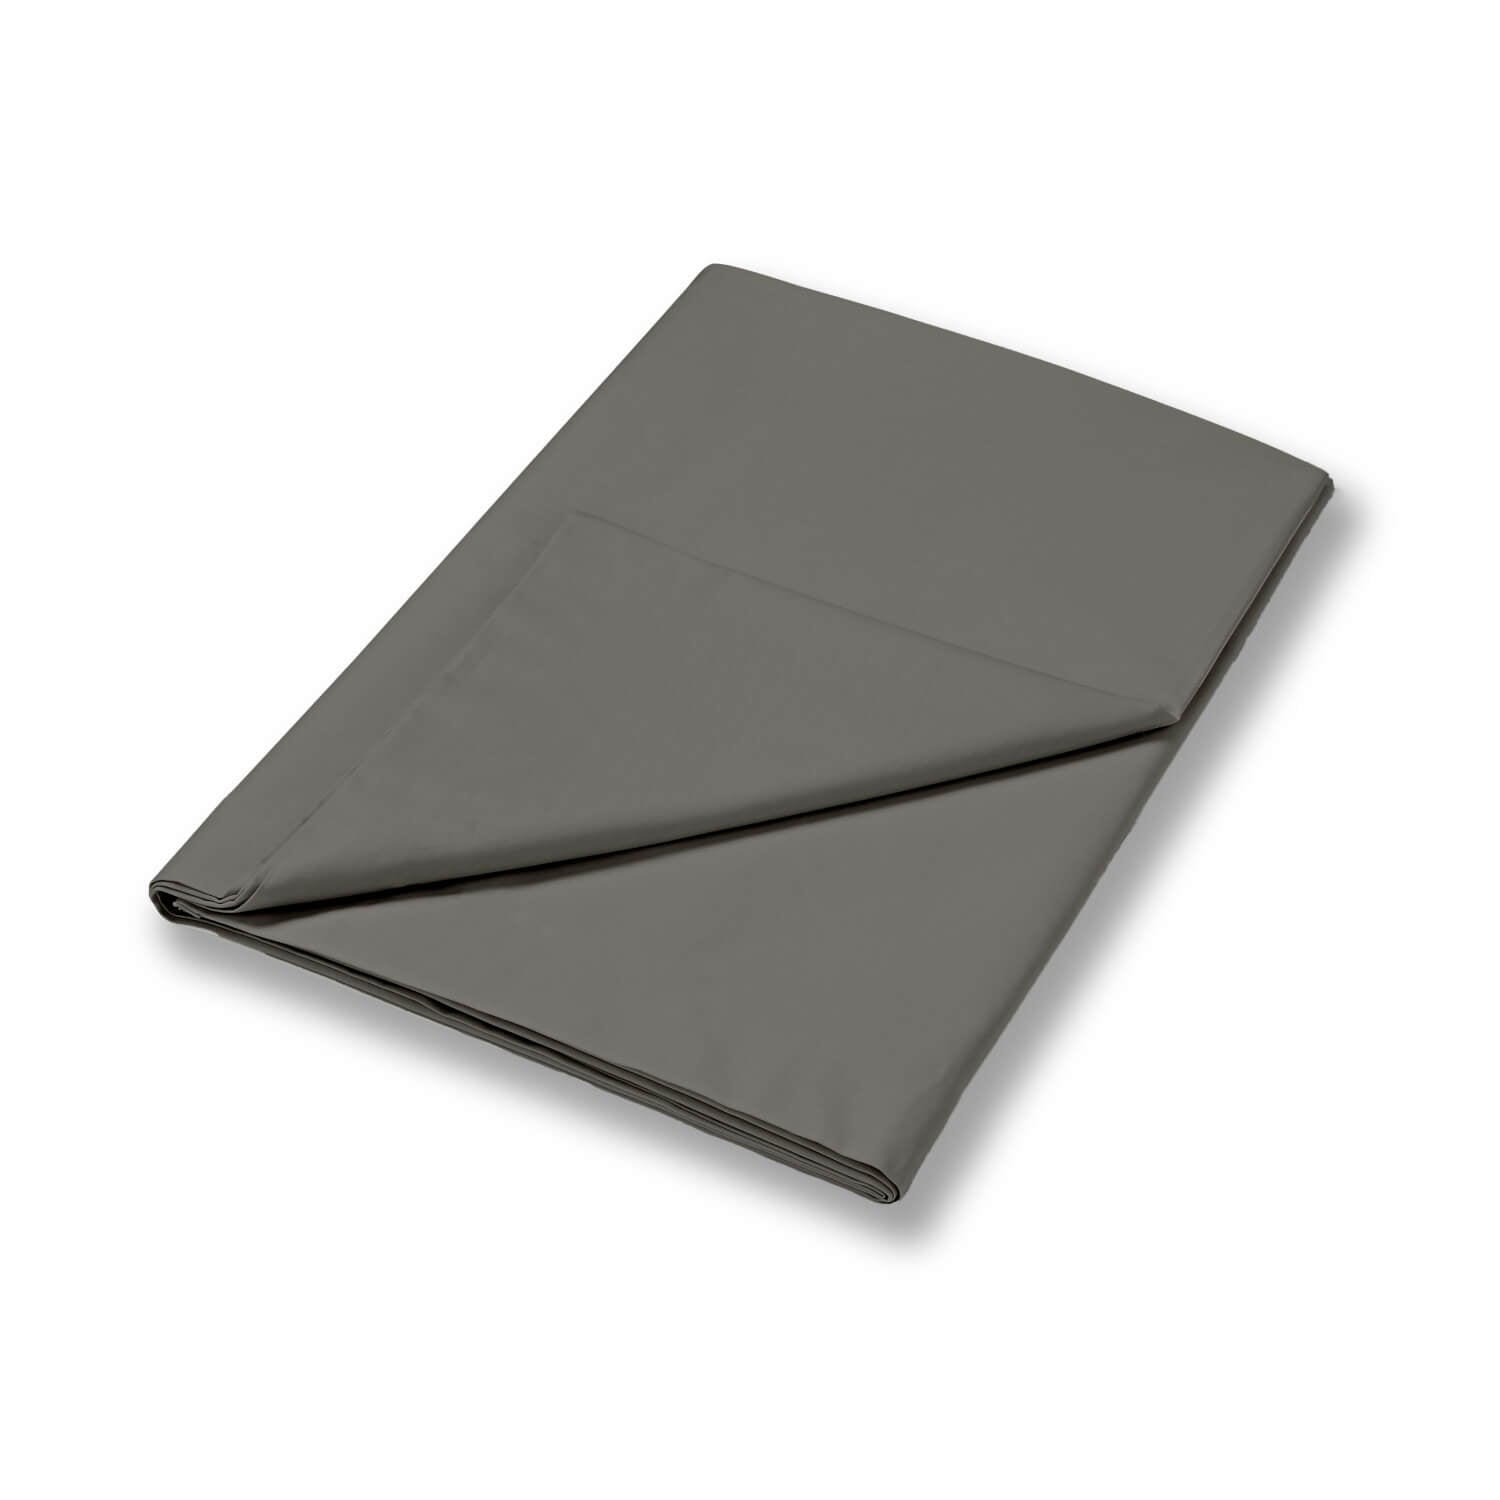 Bianca 400 Thread Count Sateen Flat Sheet 100% Cotton - Charcoal 1 Shaws Department Stores